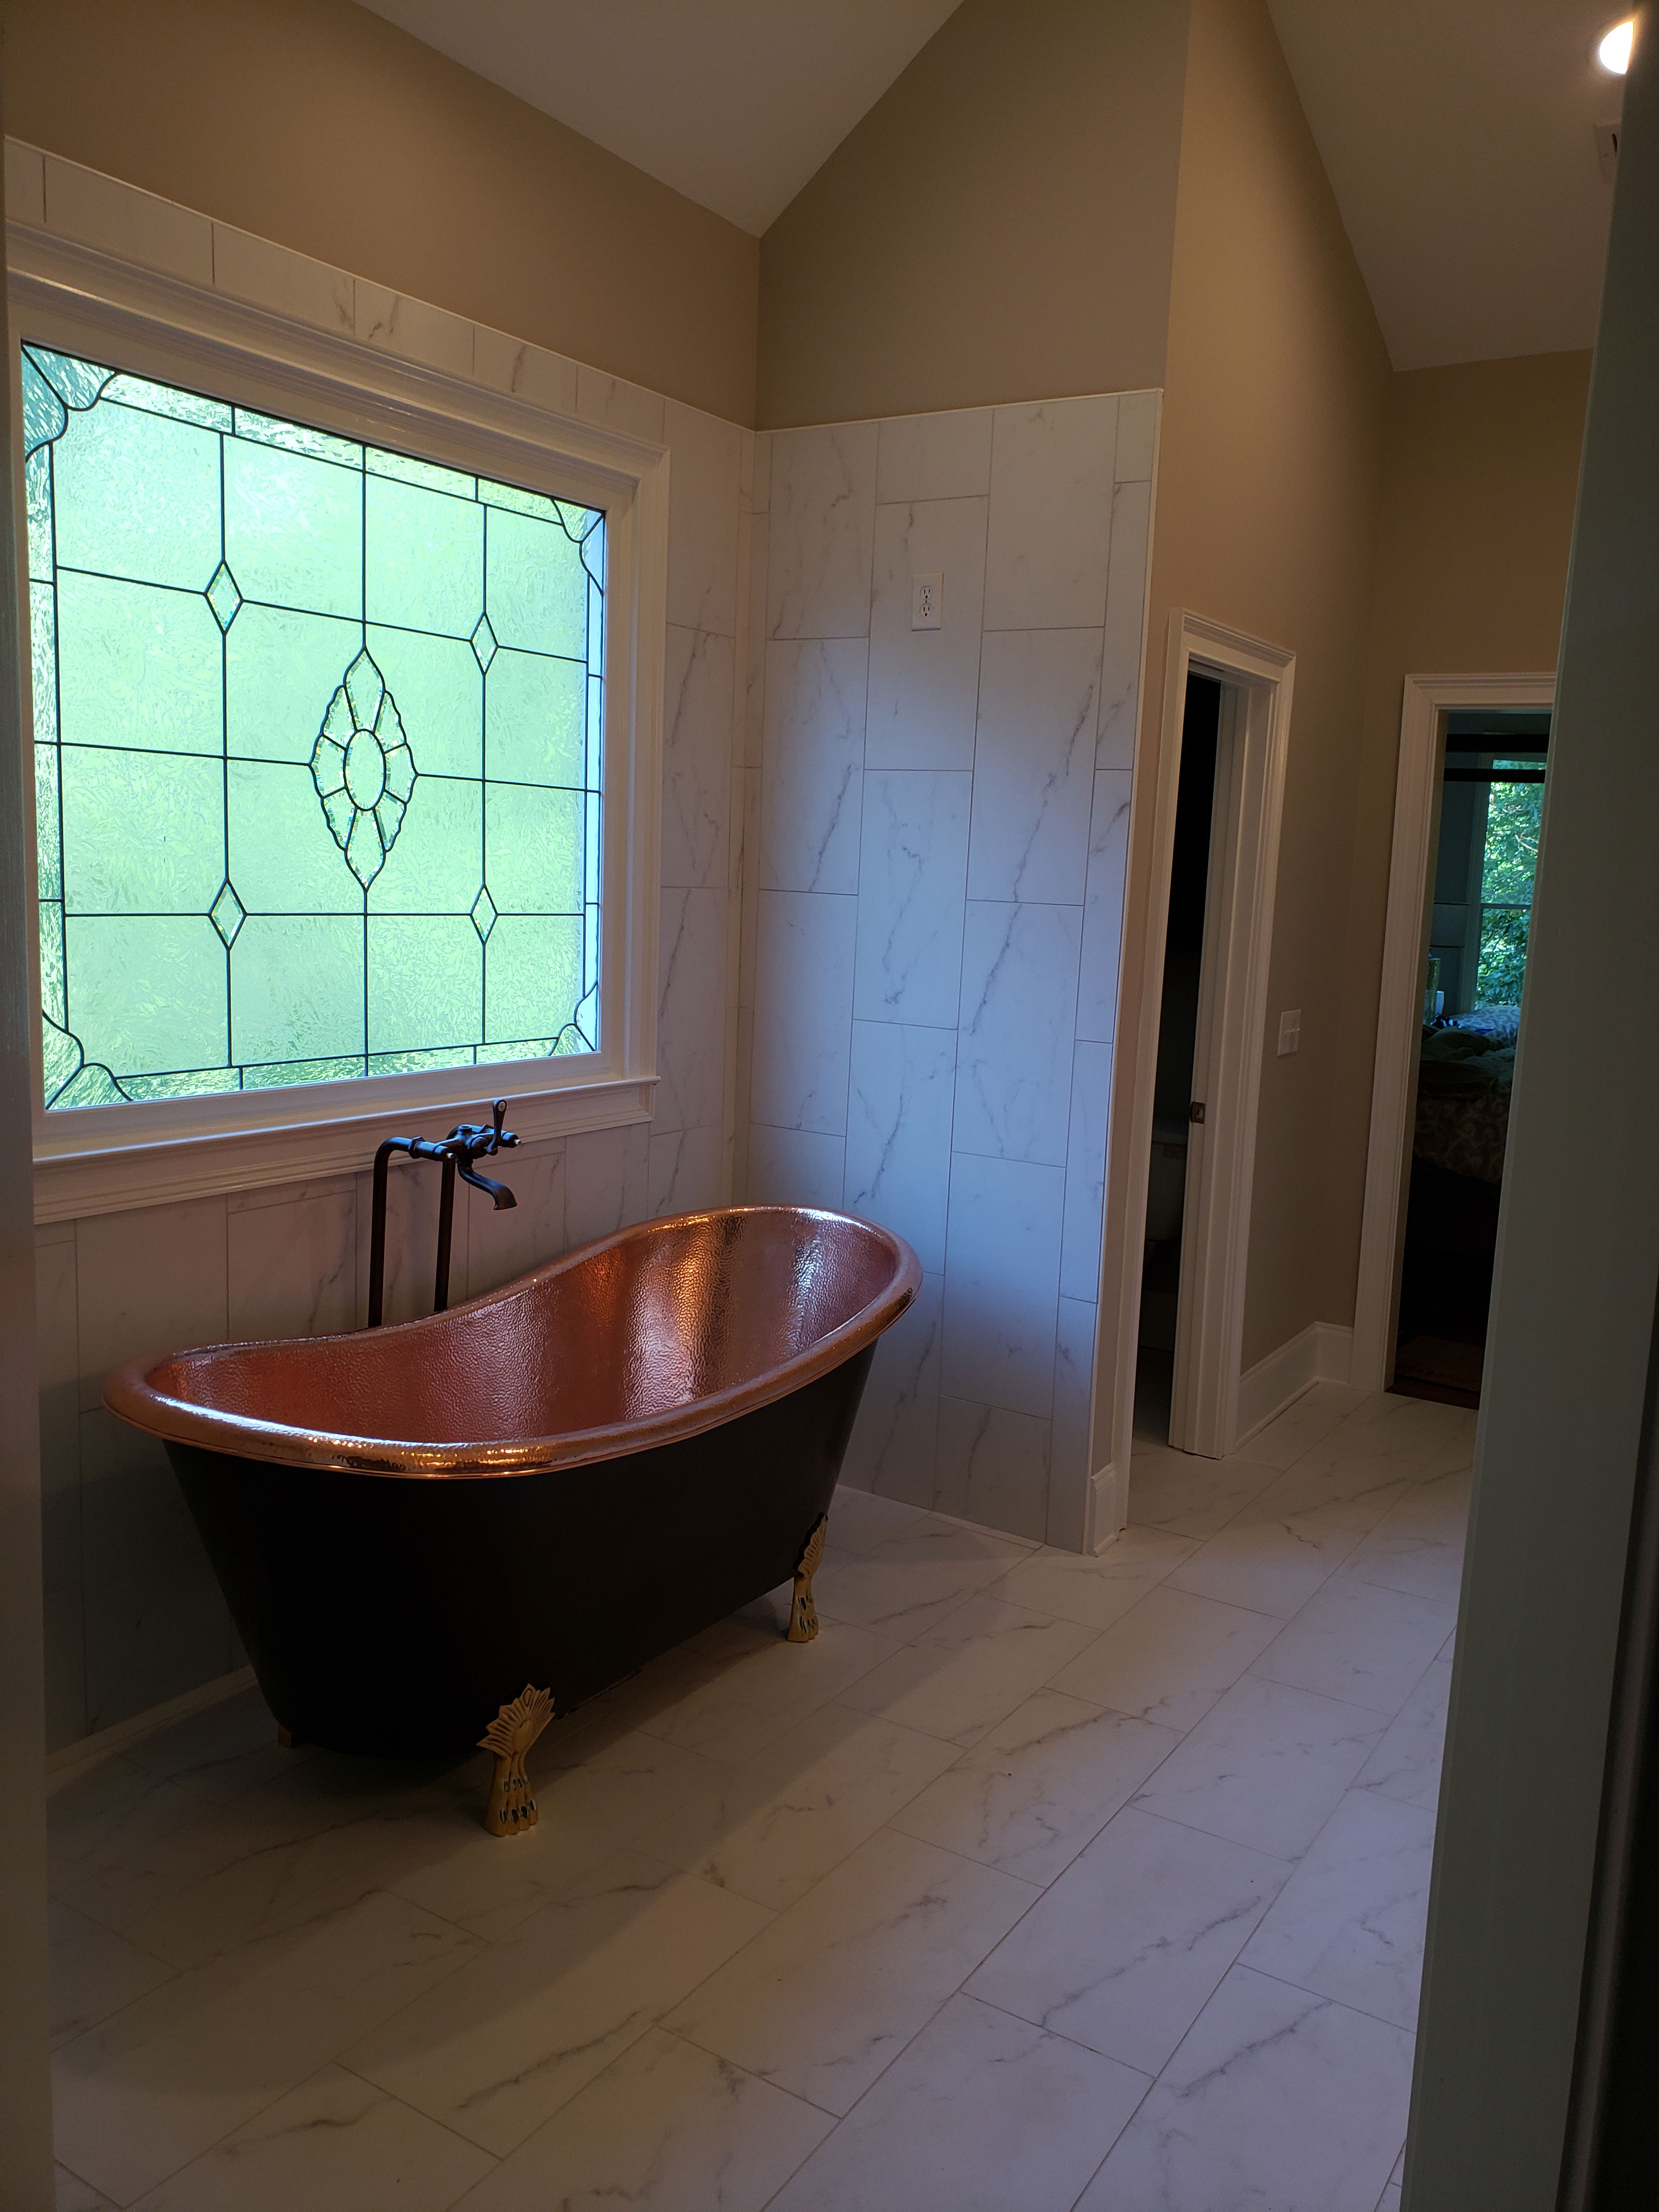 Copper clawfoot bathtub with a polished finish and black exterior near a window World CopperSmith